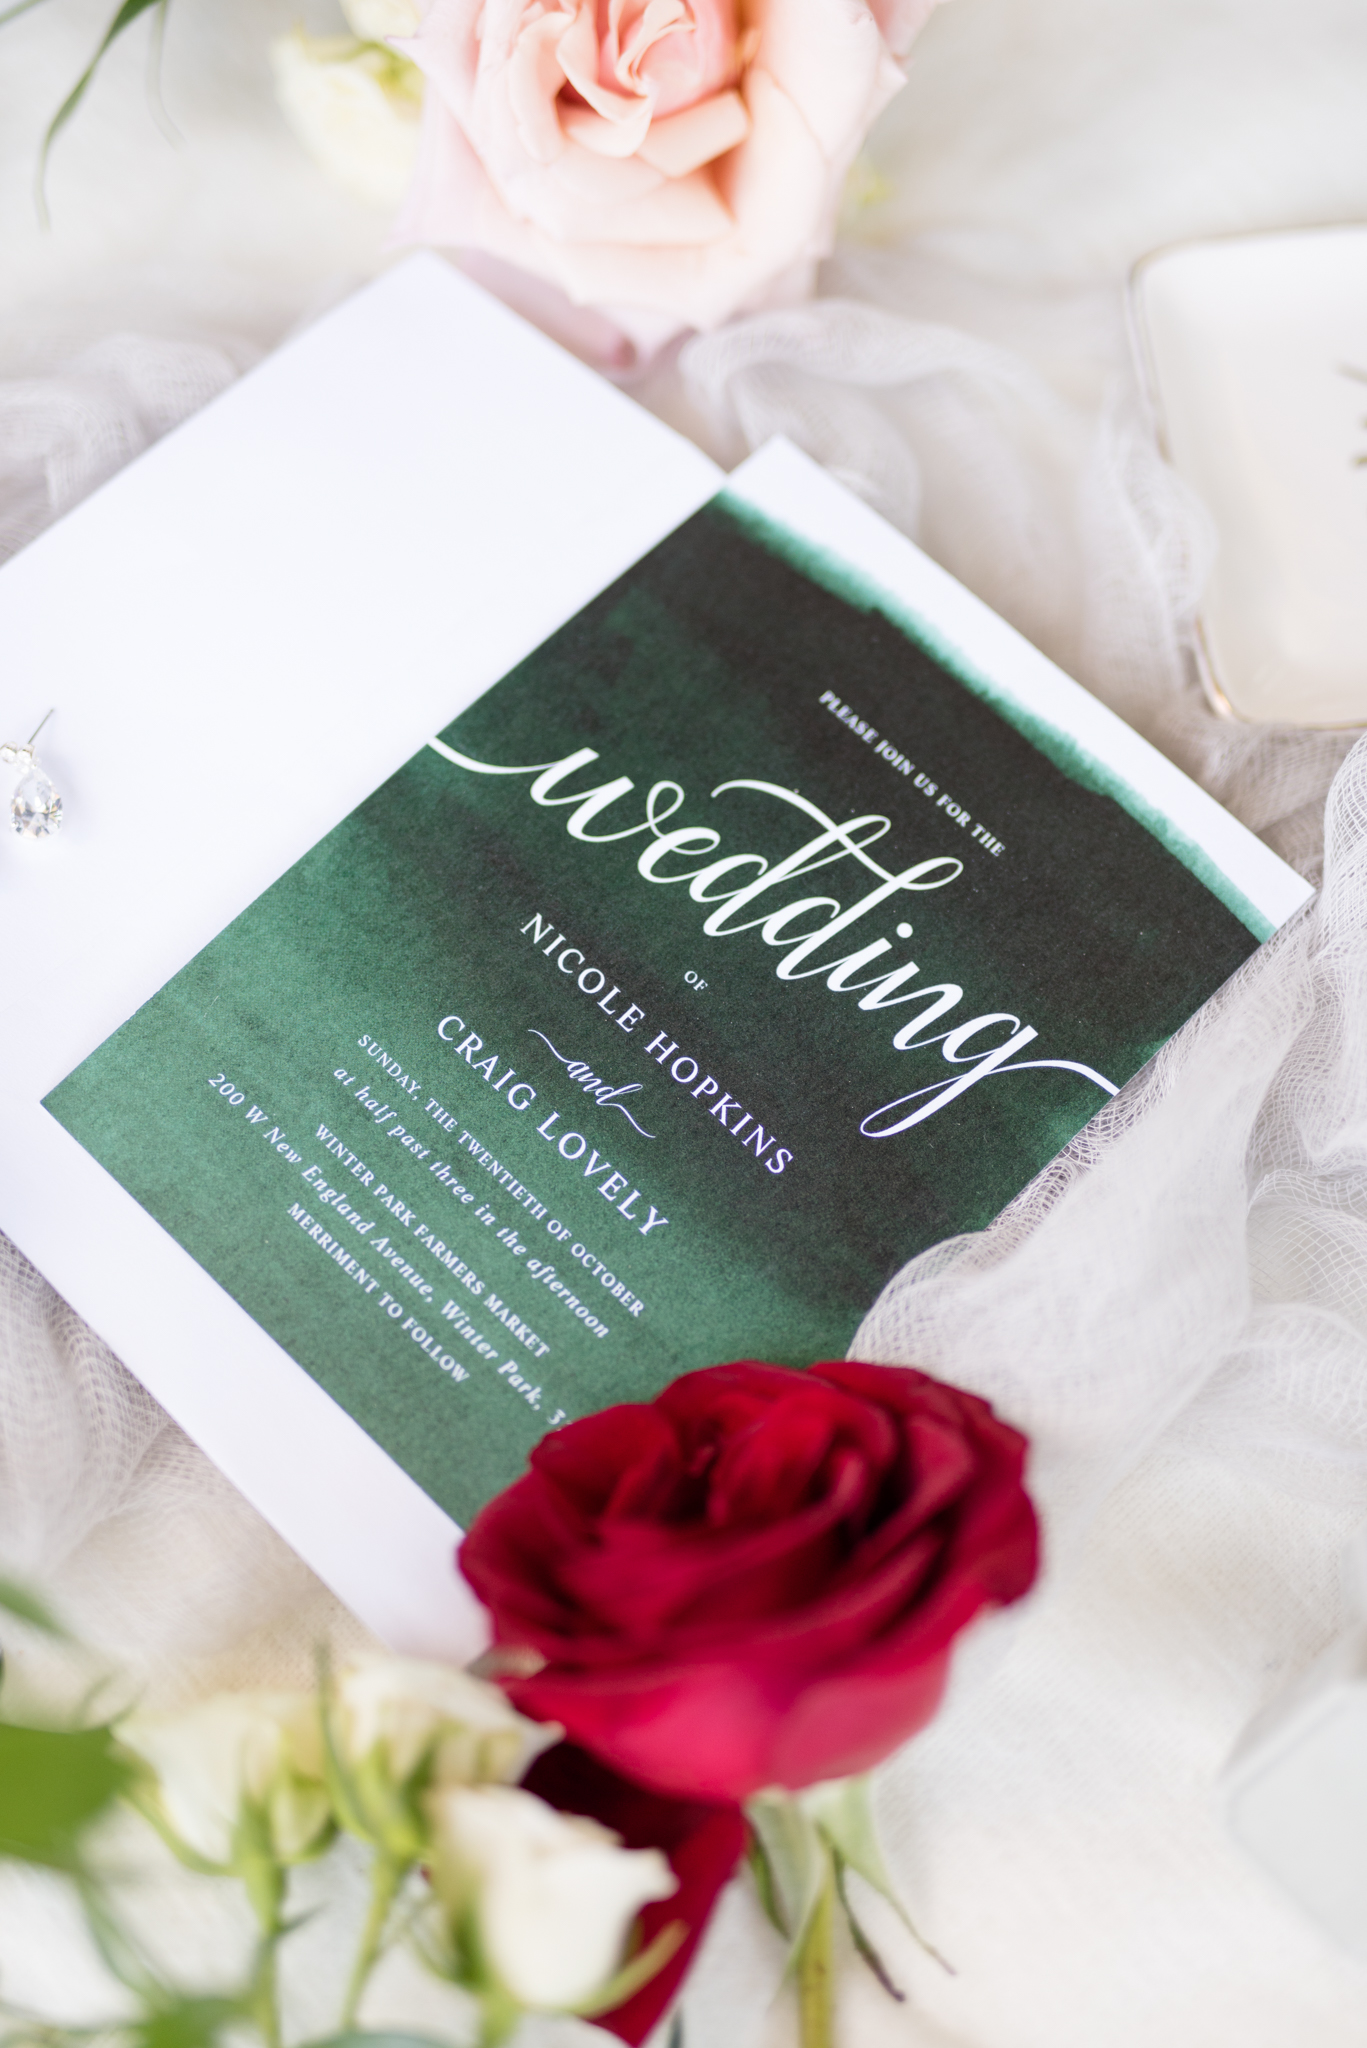 Emerald wedding invitation sits with roses.